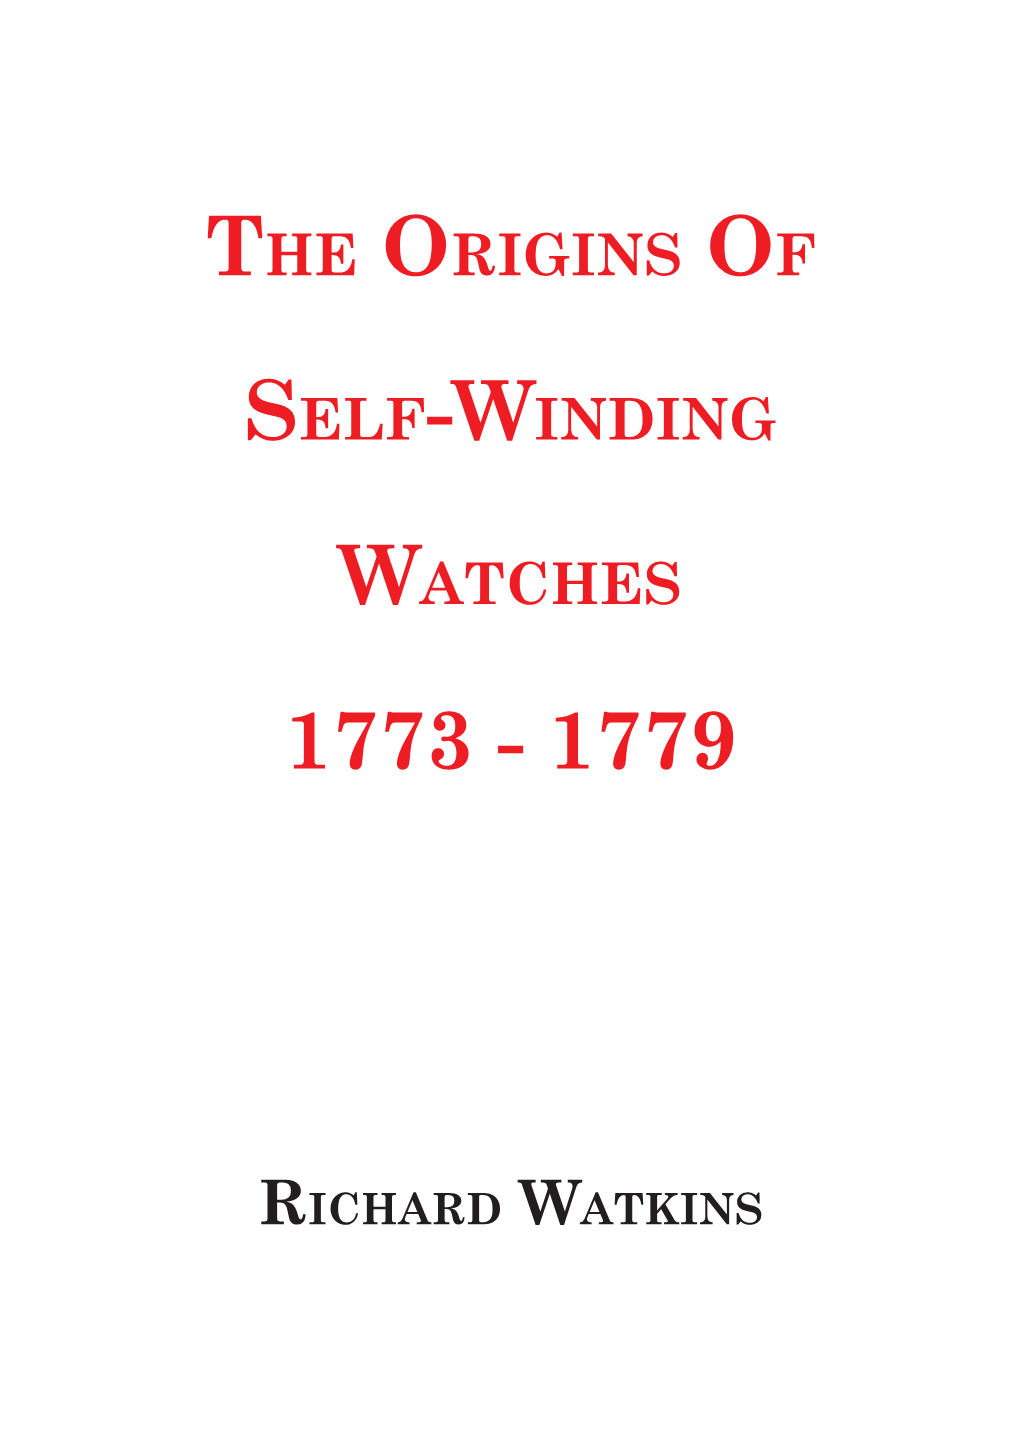 The Origins of Self-Winding Watches